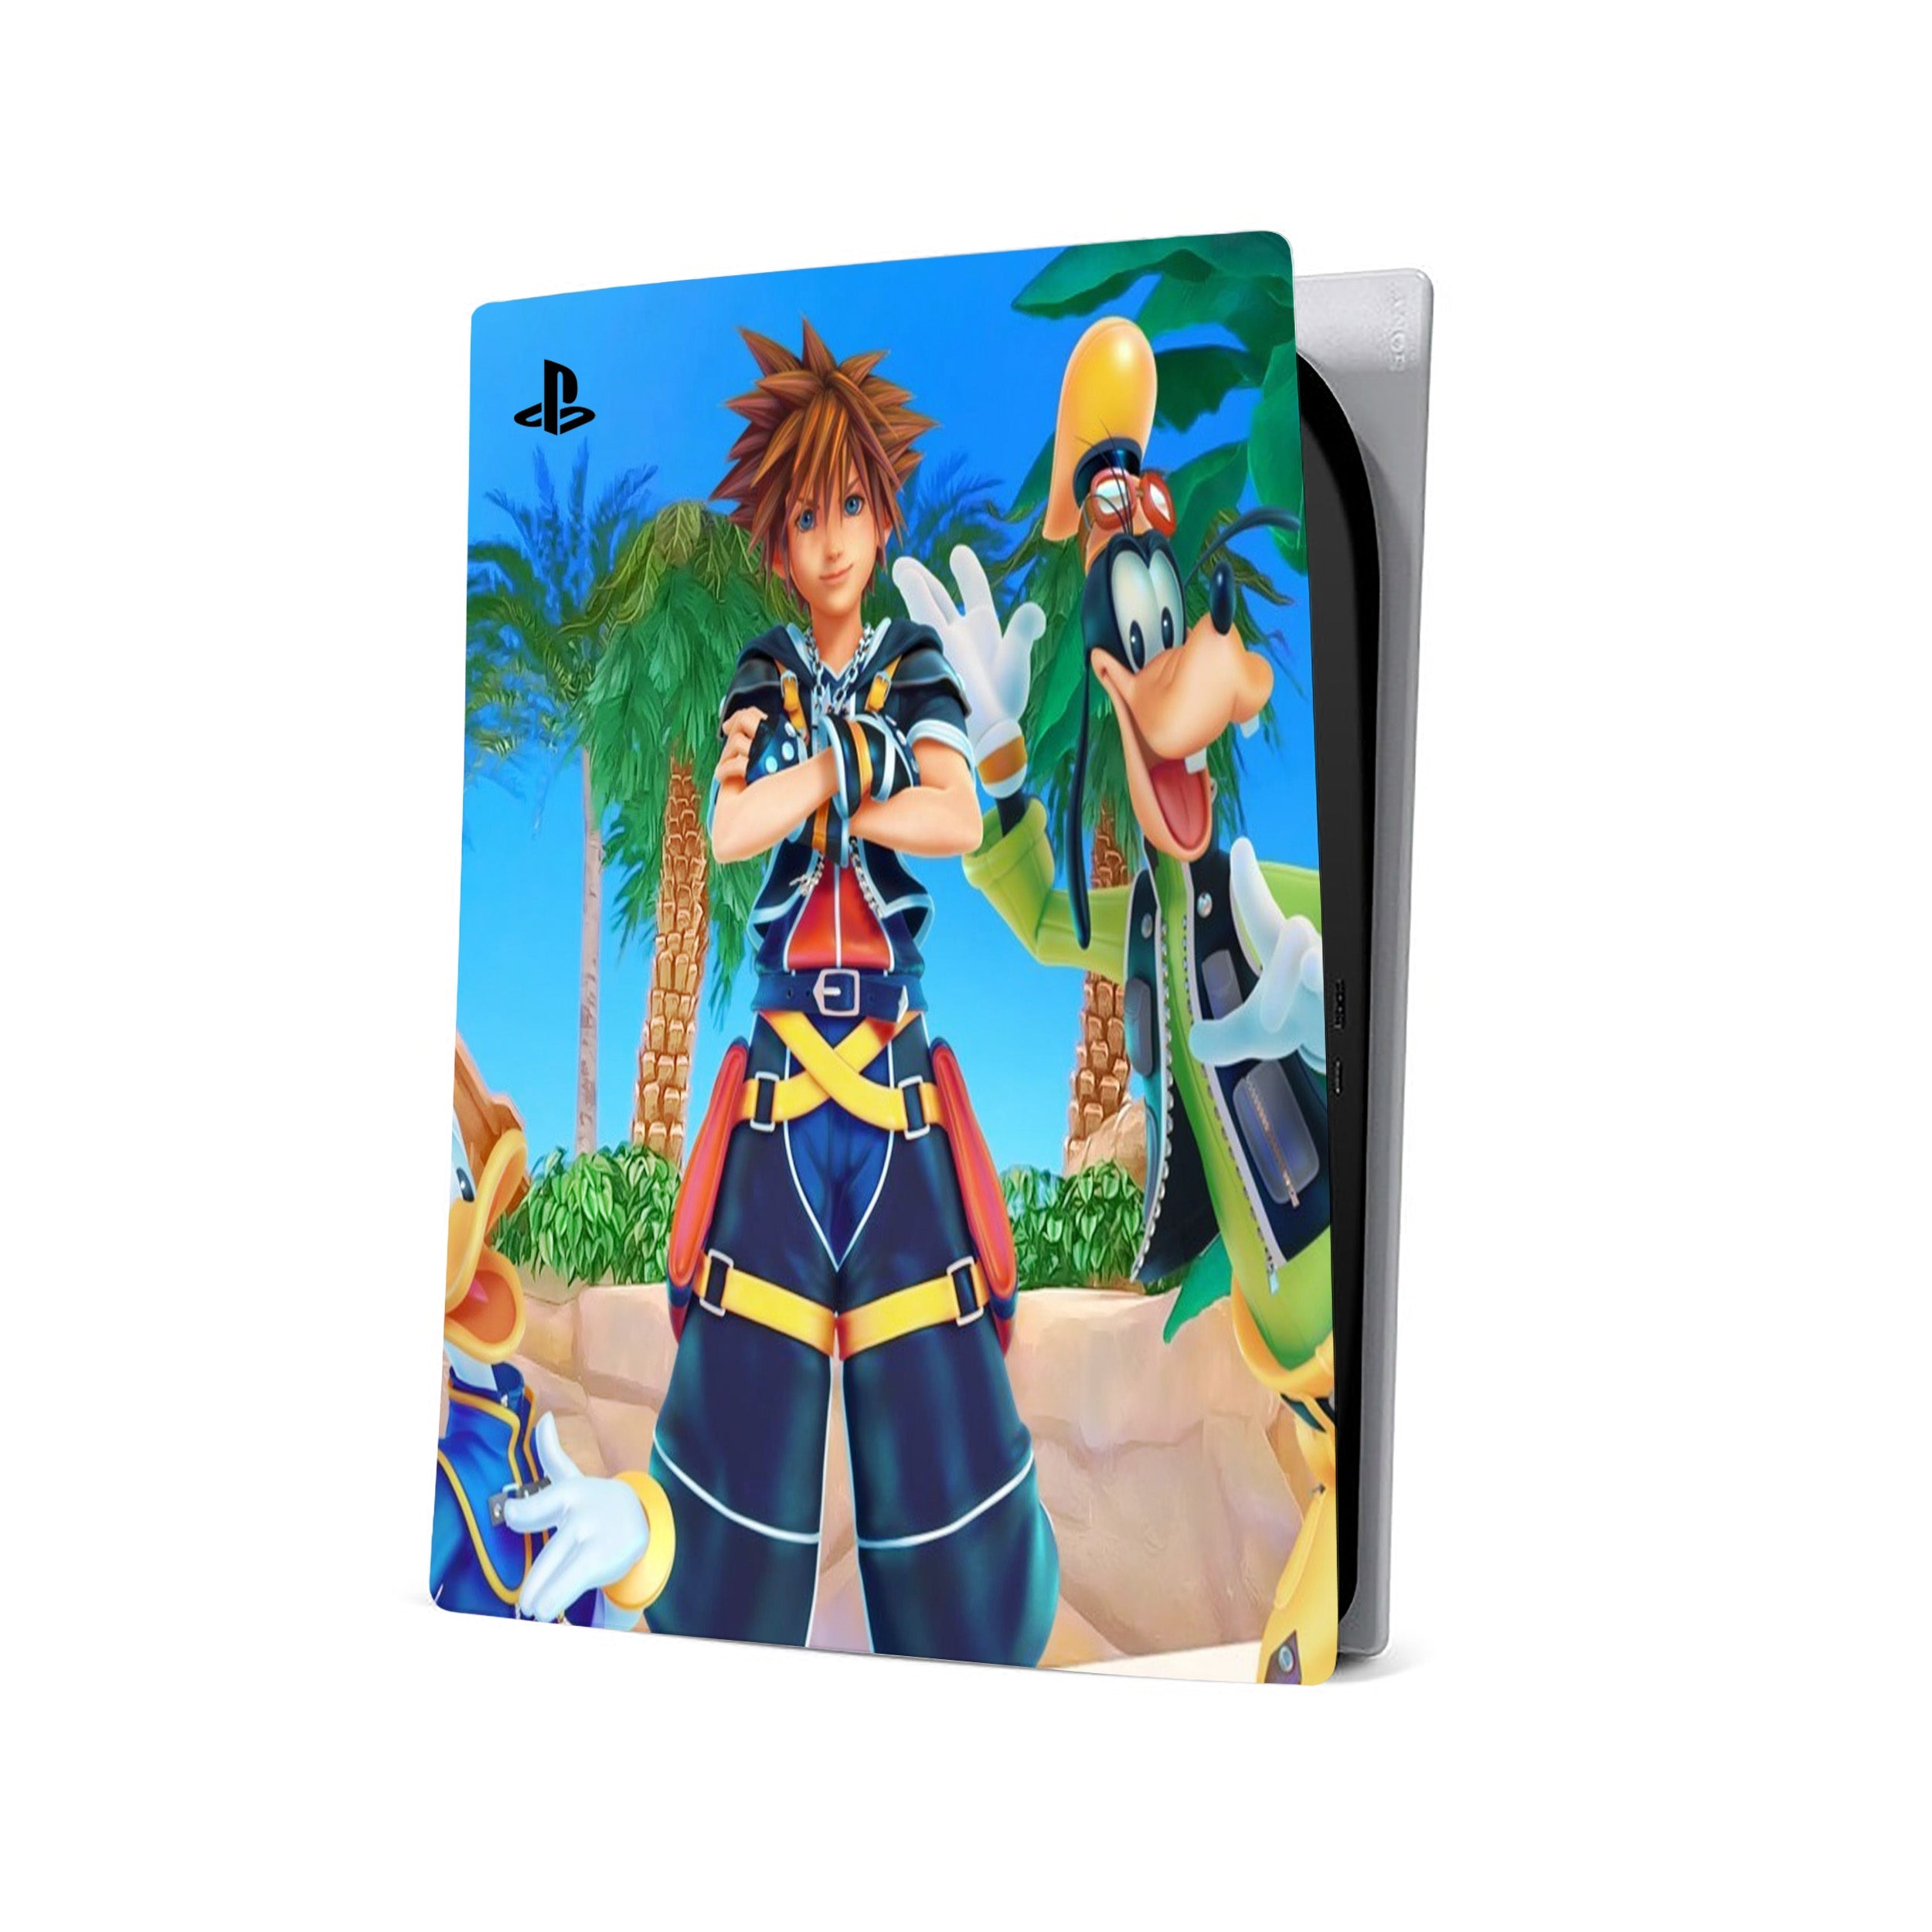 A video game skin featuring a Kingdom Hearts design for the PS5.